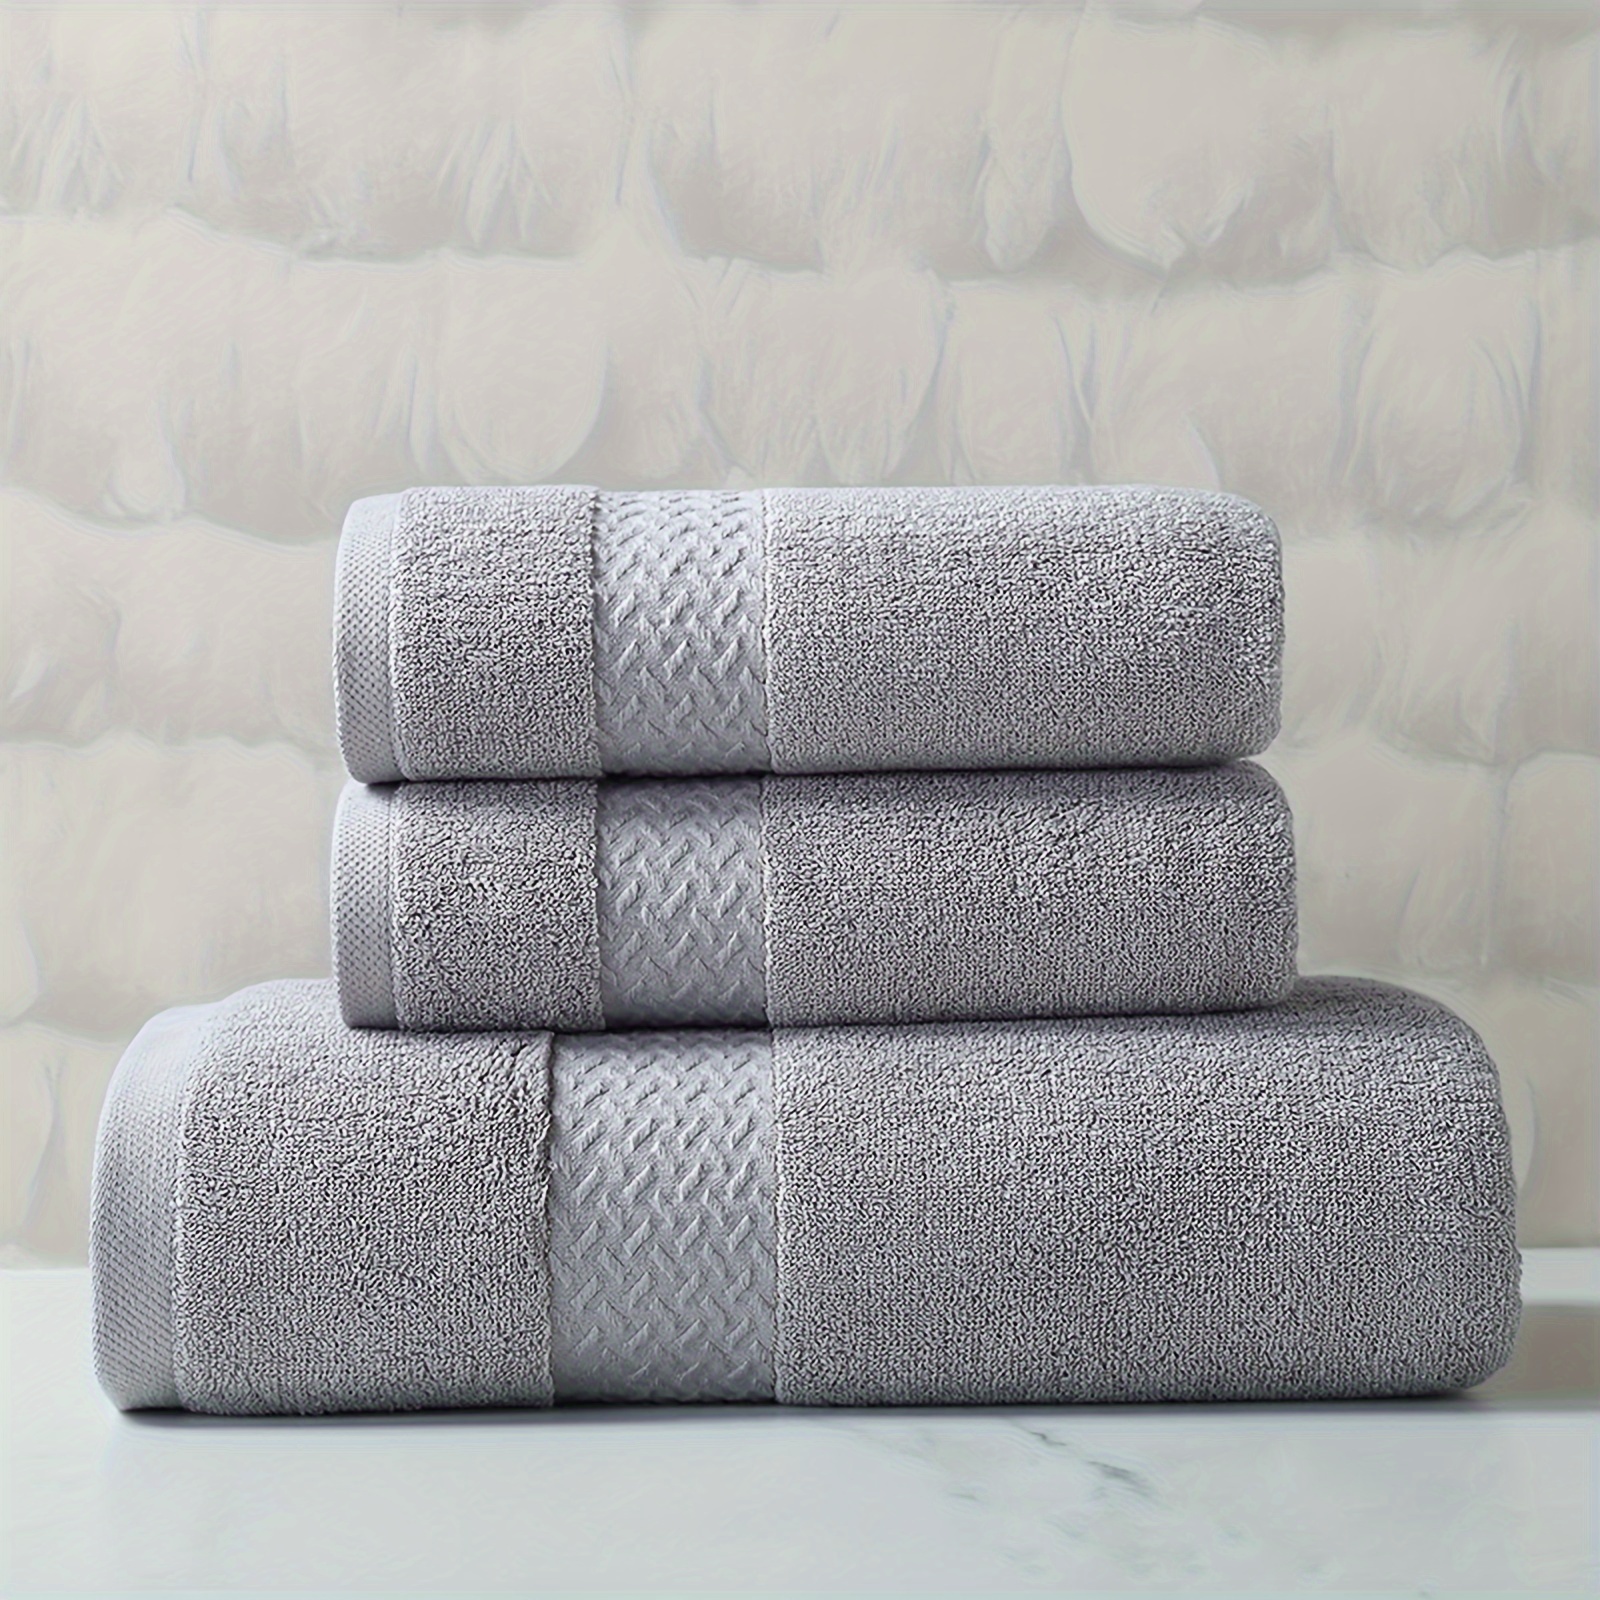 Bath Towels| Premium Cotton Towels | Waffle Towels Lightweight & Super Absorbent, Quick Dry, Perfect Towels for Bathroom for Daily Use| Luxury Hotel